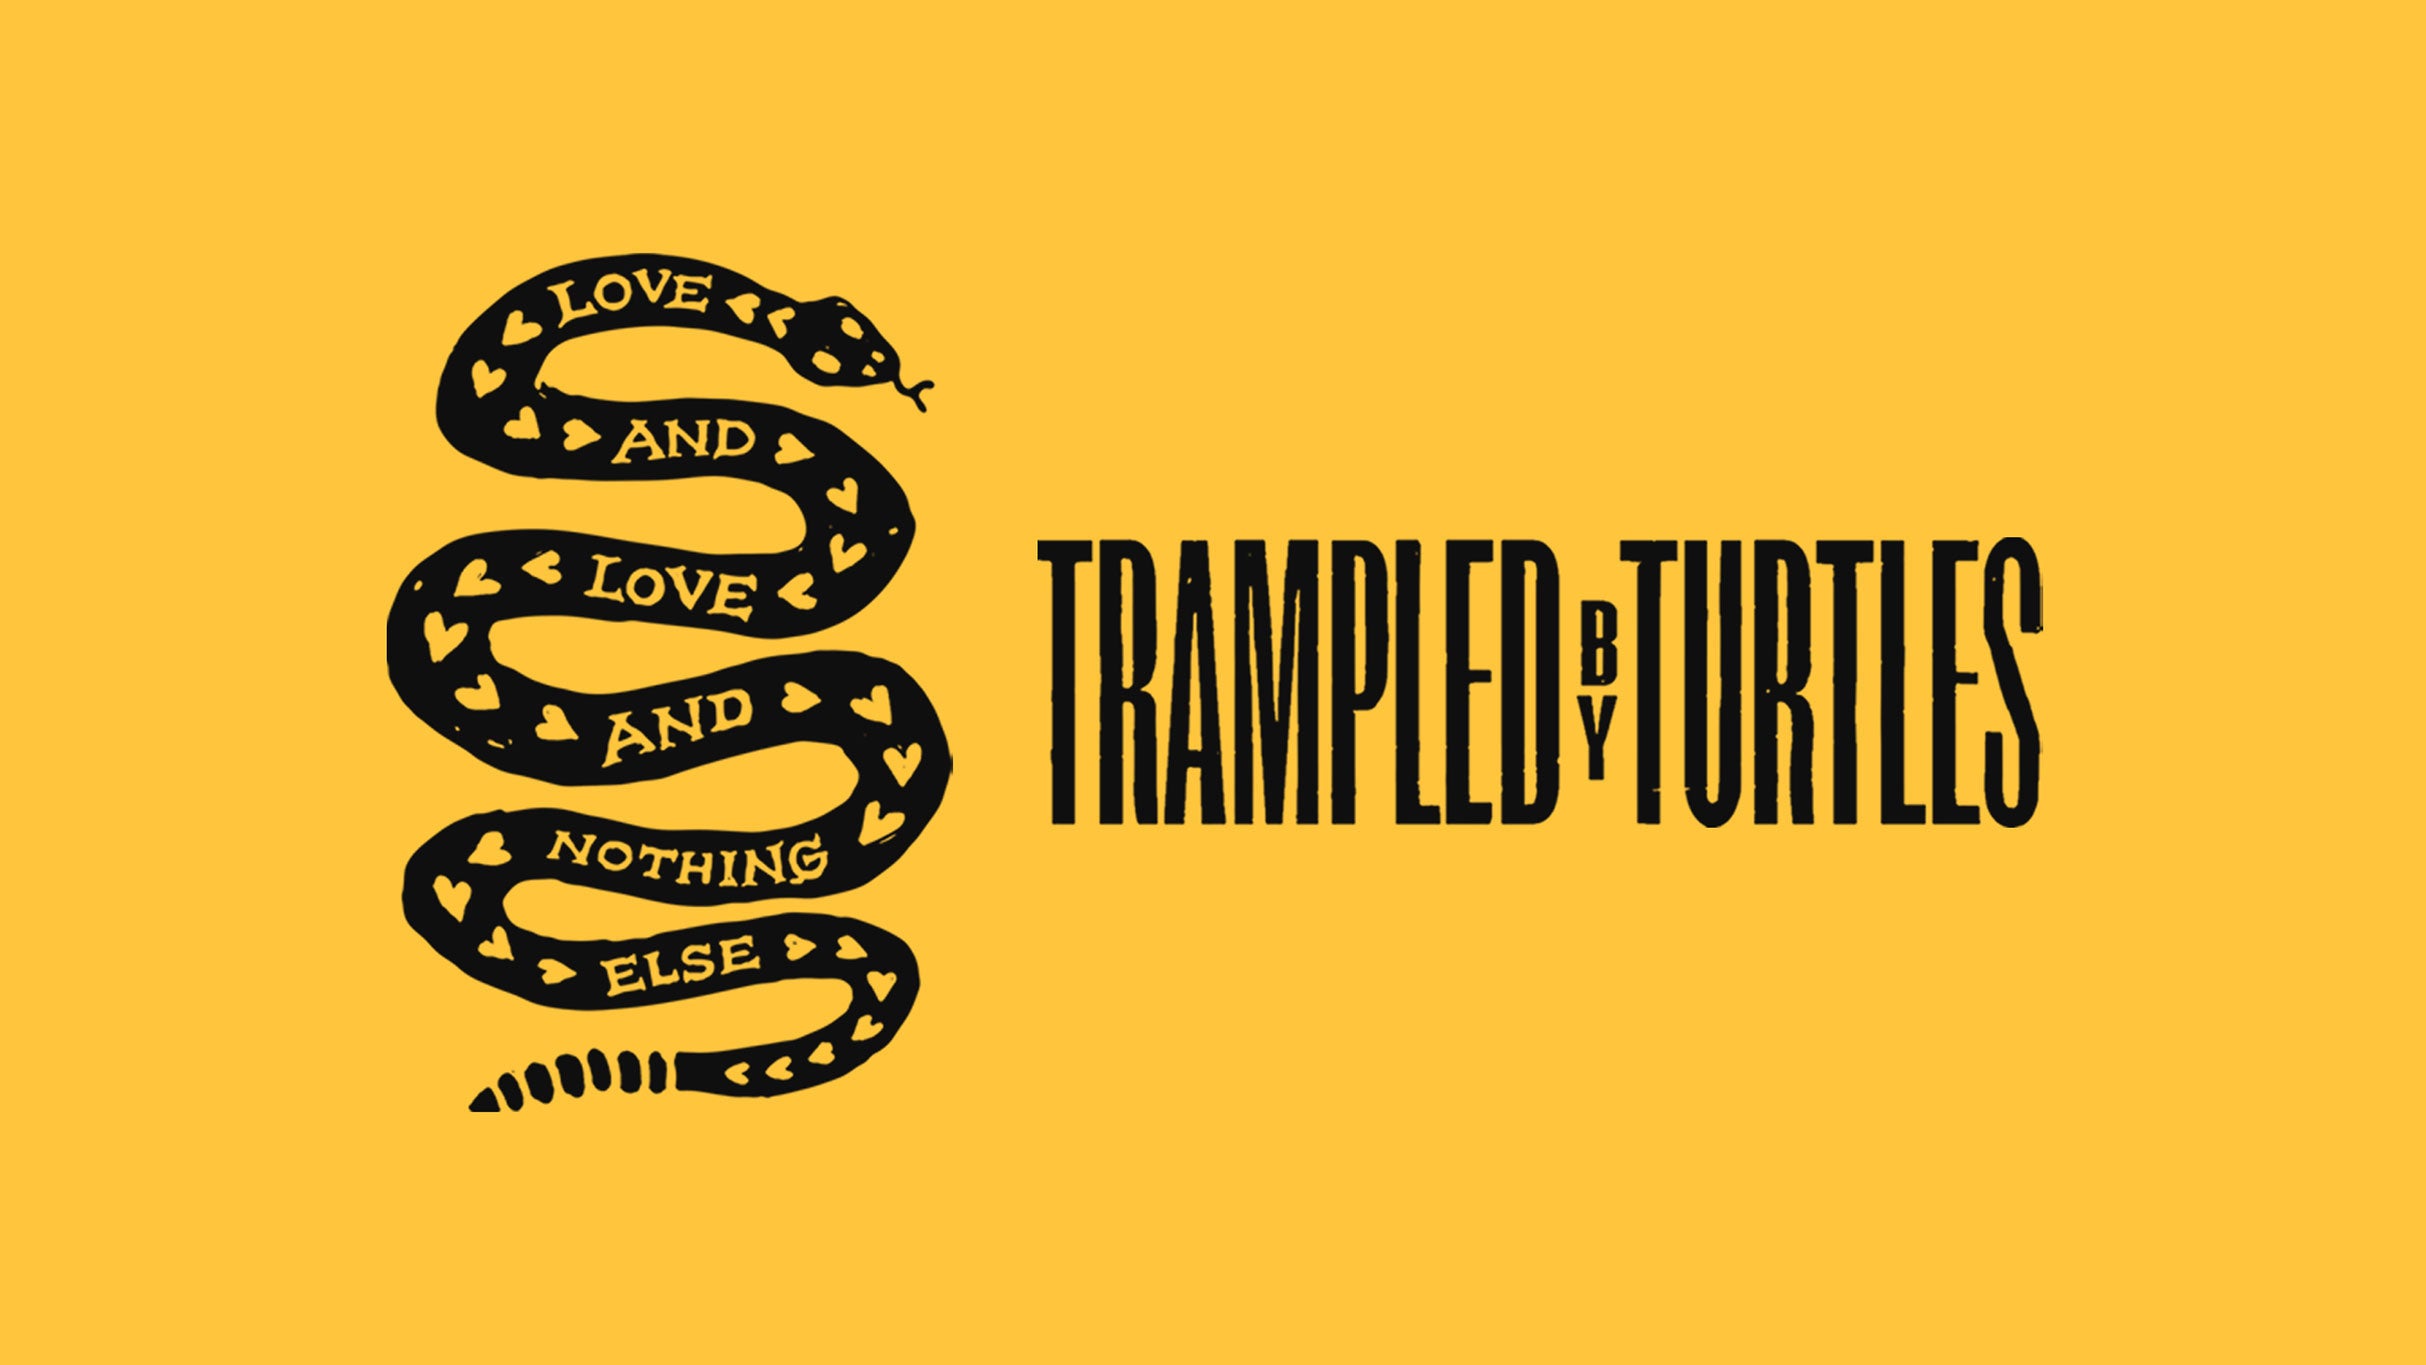 Trampled By Turtles at Uptown Theater